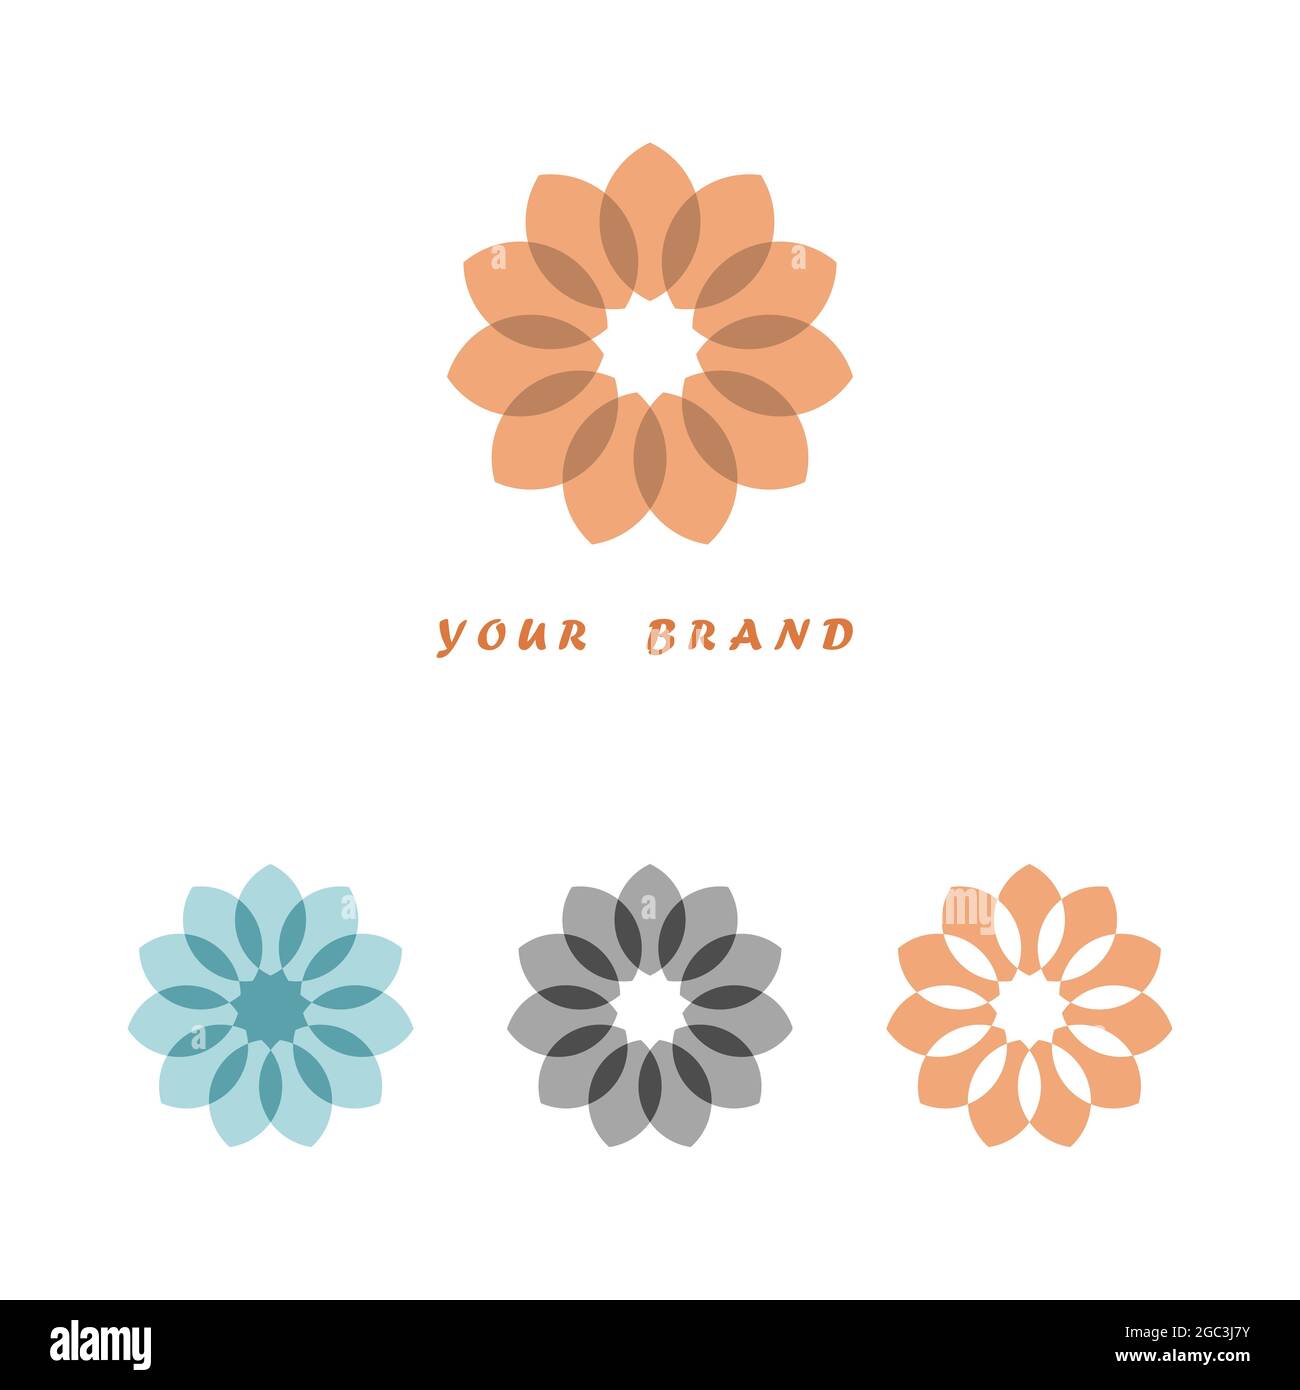 Illustration of a flower-shaped logo design with three different versions on a white background Stock Photo